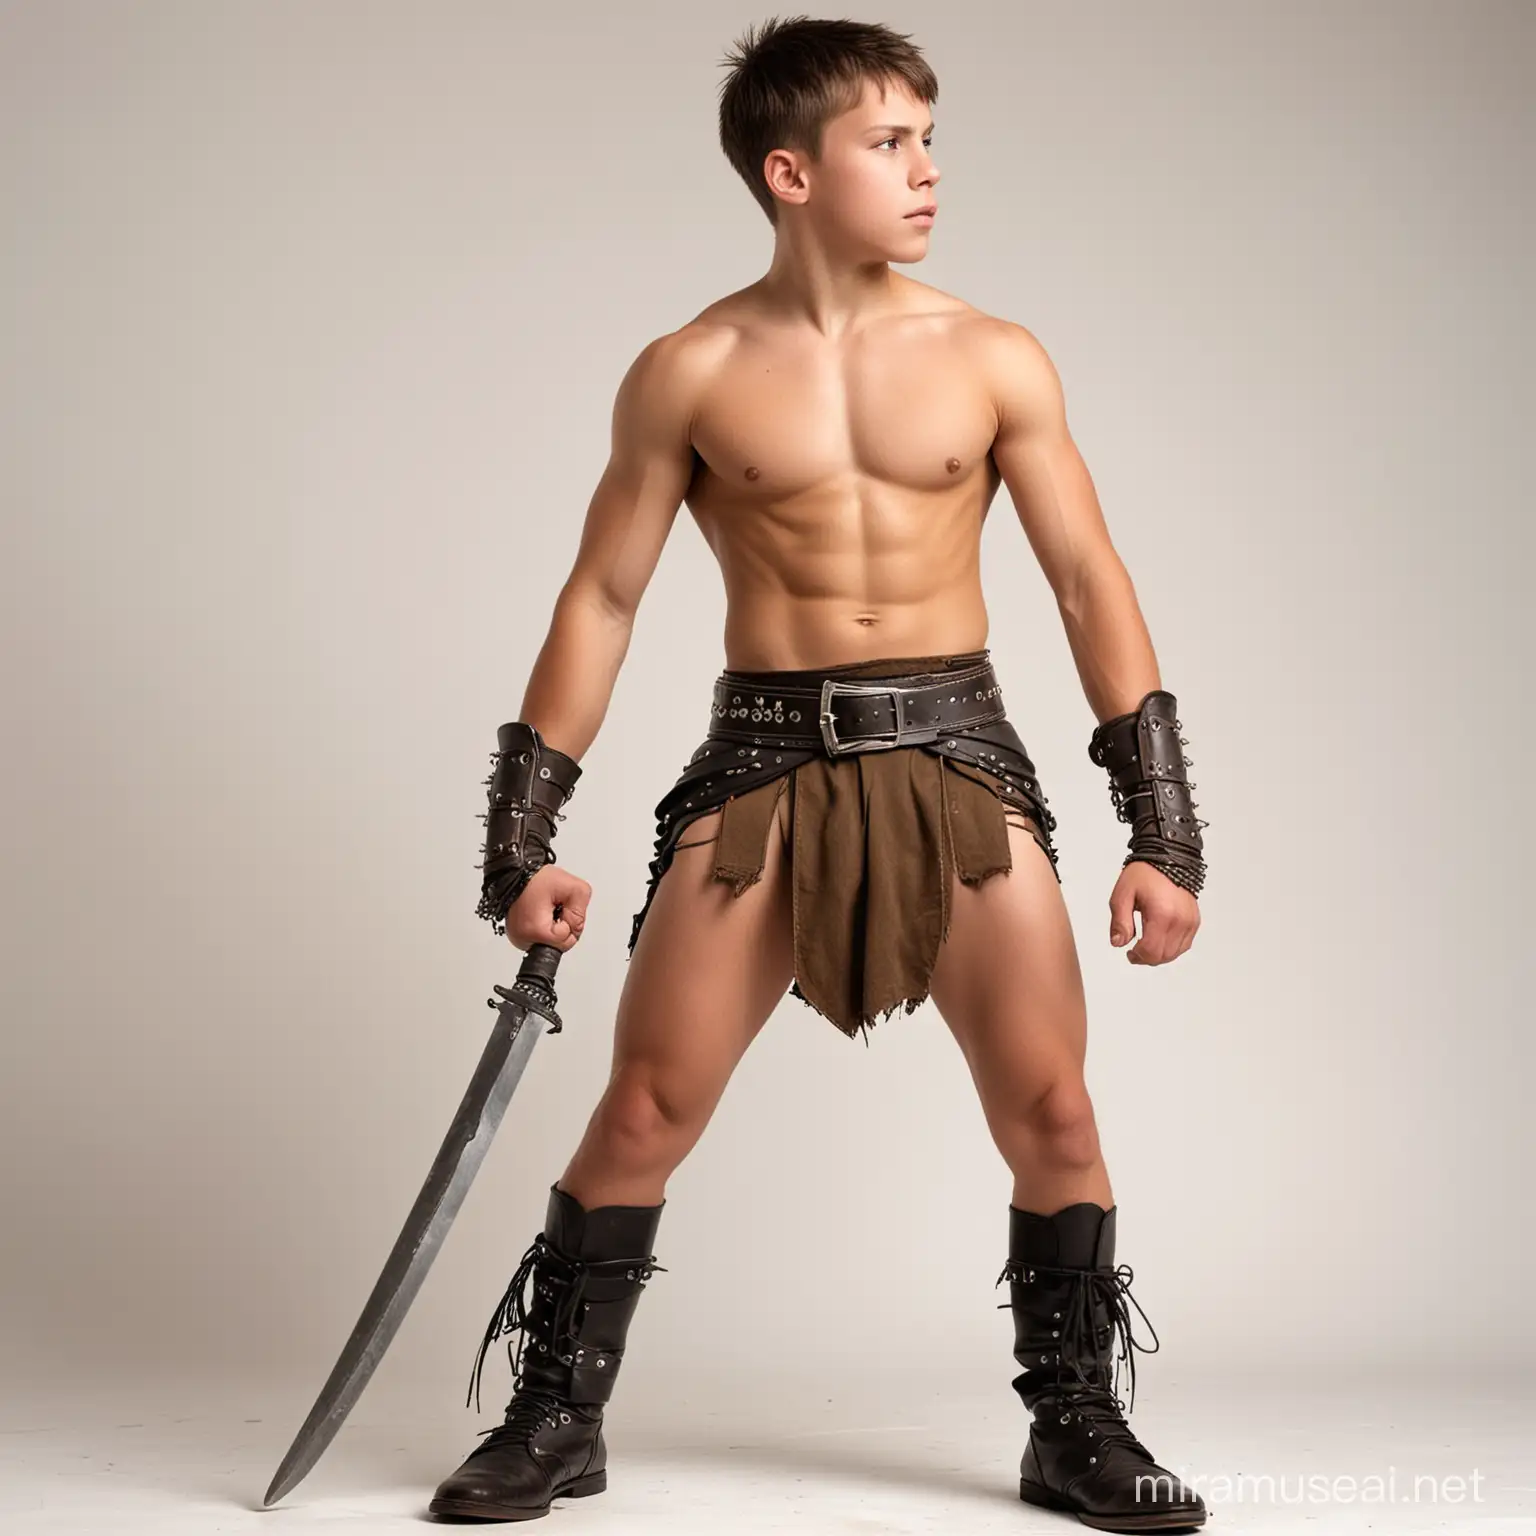 Muscular Teenage Warrior Profile in Short Loincloth and Boots